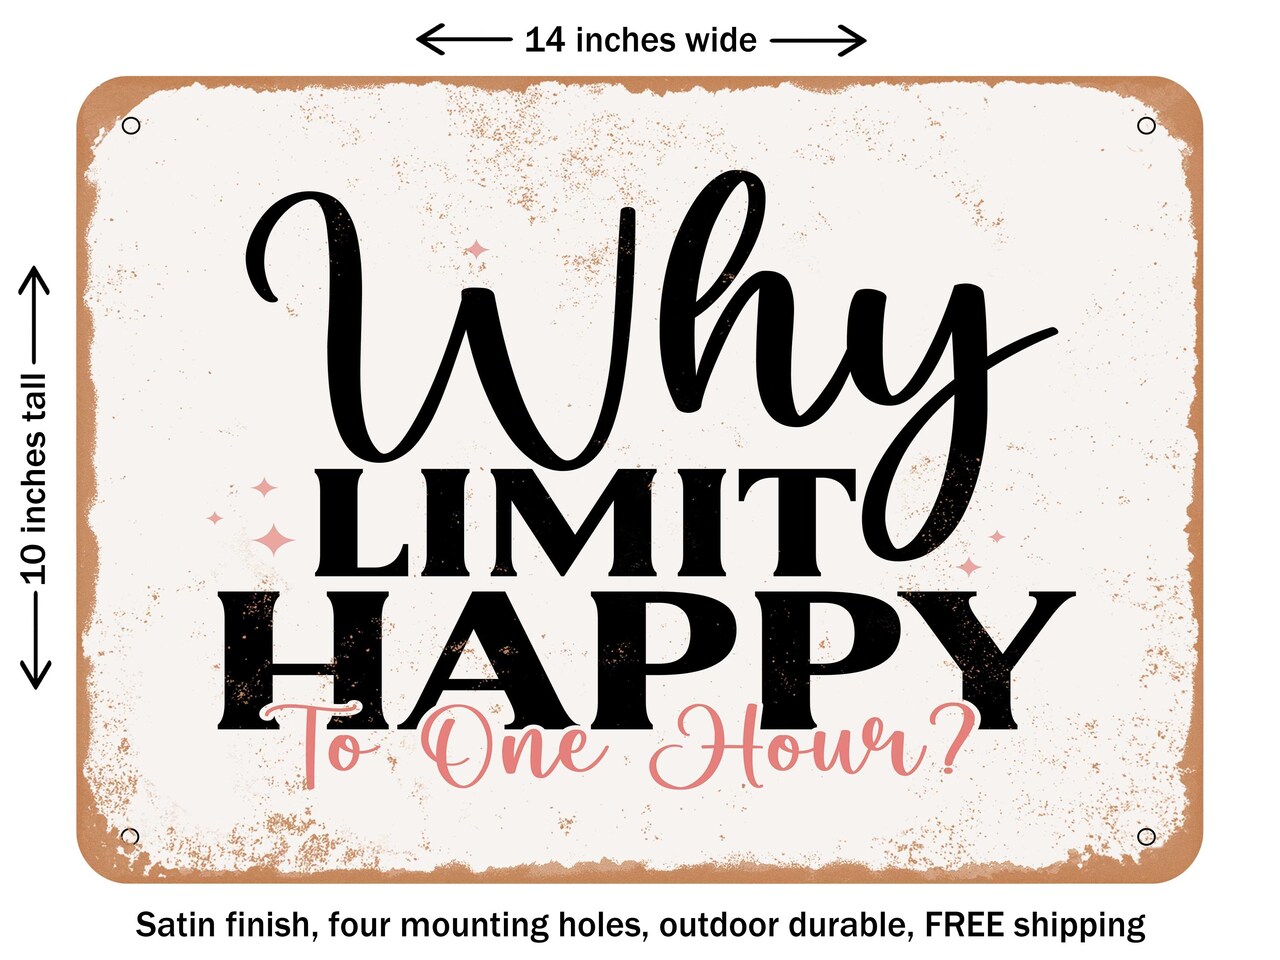 DECORATIVE METAL SIGN - Why Limit Happy to One Hour - Vintage Rusty Look